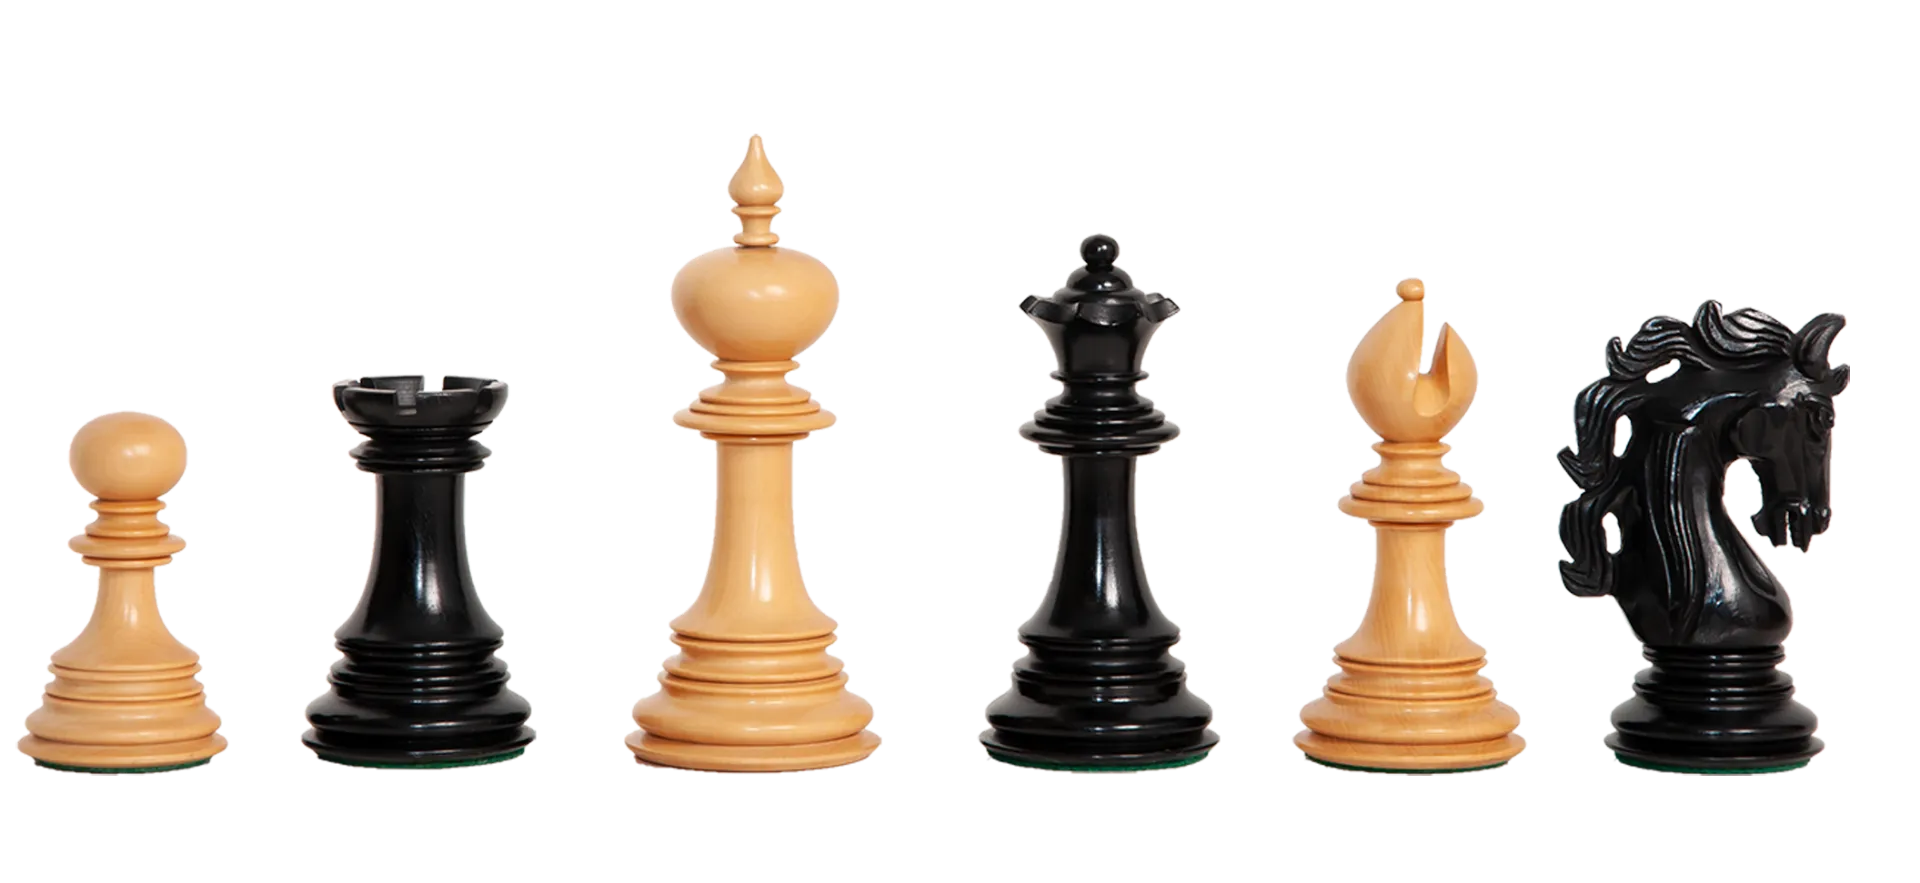 WOODEN CHESS PIECES FOR CHESS SET CHESSMEN CHESS HANDCRAFTED FOR CHESS BOARD 